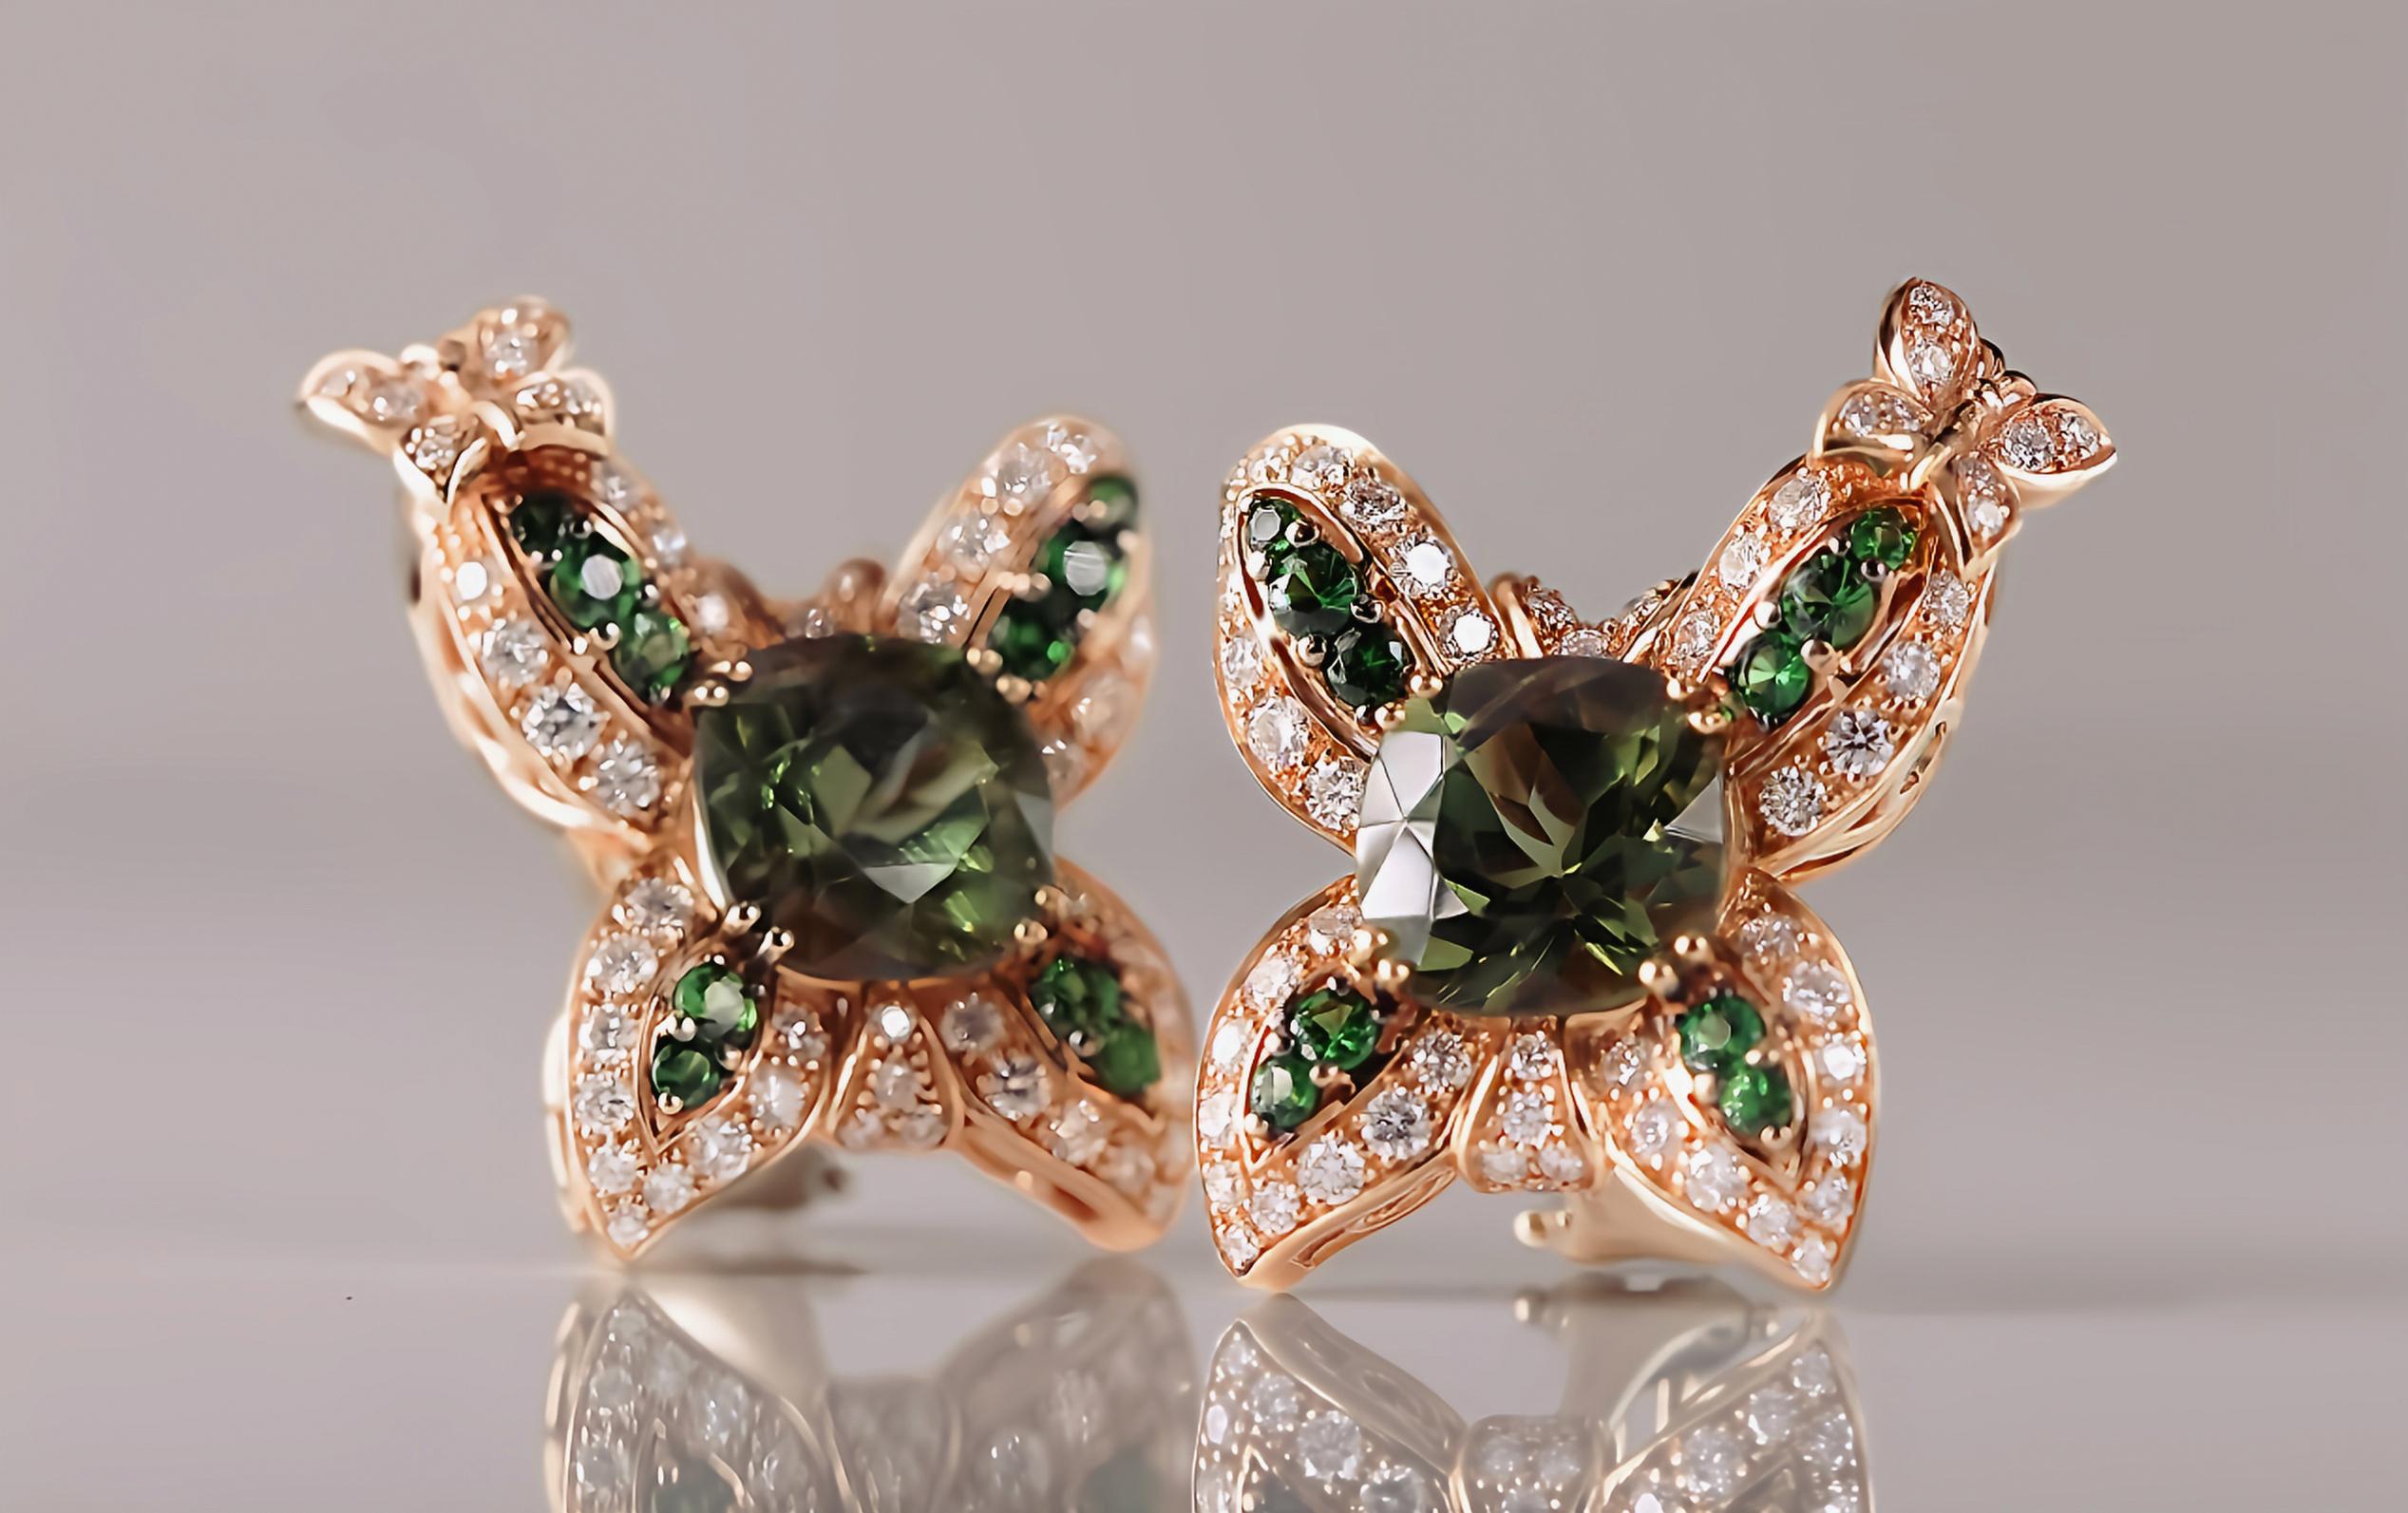 These beautiful earrings are made in Florence by Tuscan craftsmen in 18kt rose gold and feature a charming butterfly design.

In the centre of each earring is a cushion-cut green tourmaline from Madagascar with dimensions of 9.70 x 9.30 mm, a total